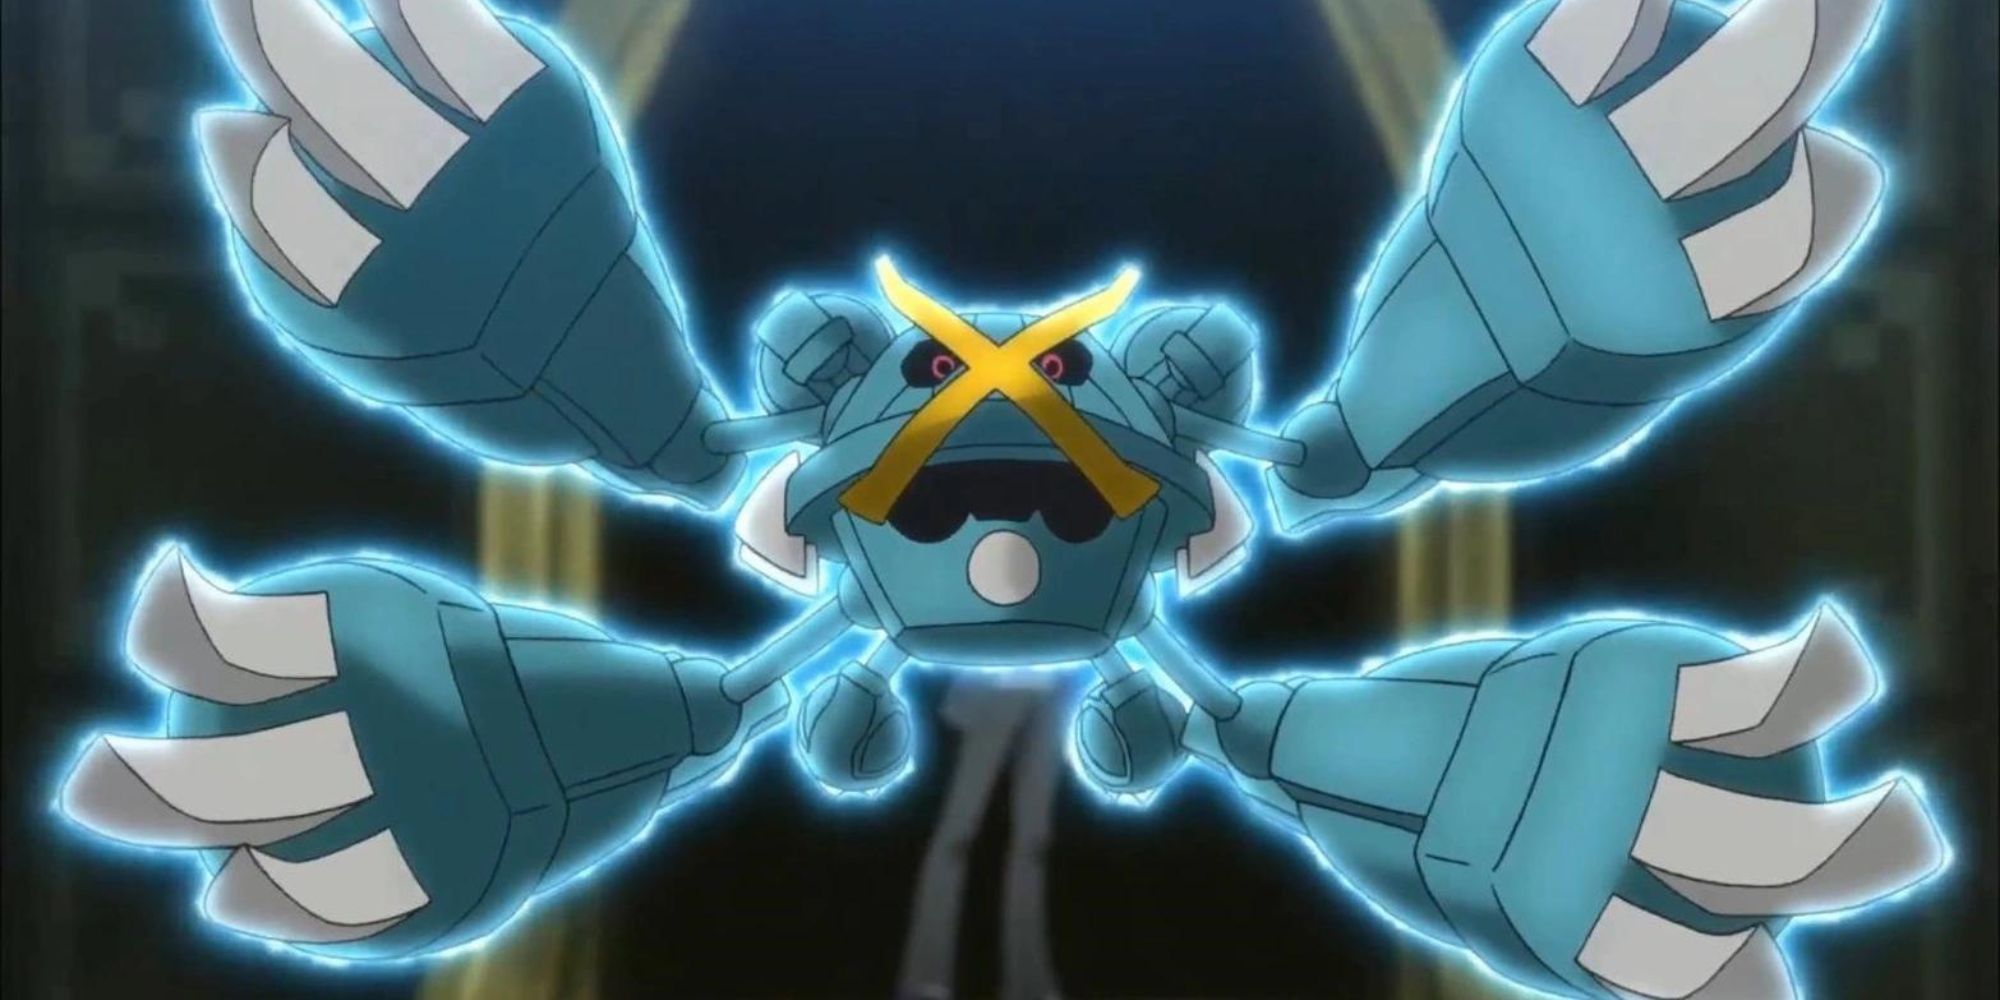 Mega Metagross prepares to use an attack in the Pokemon anime.